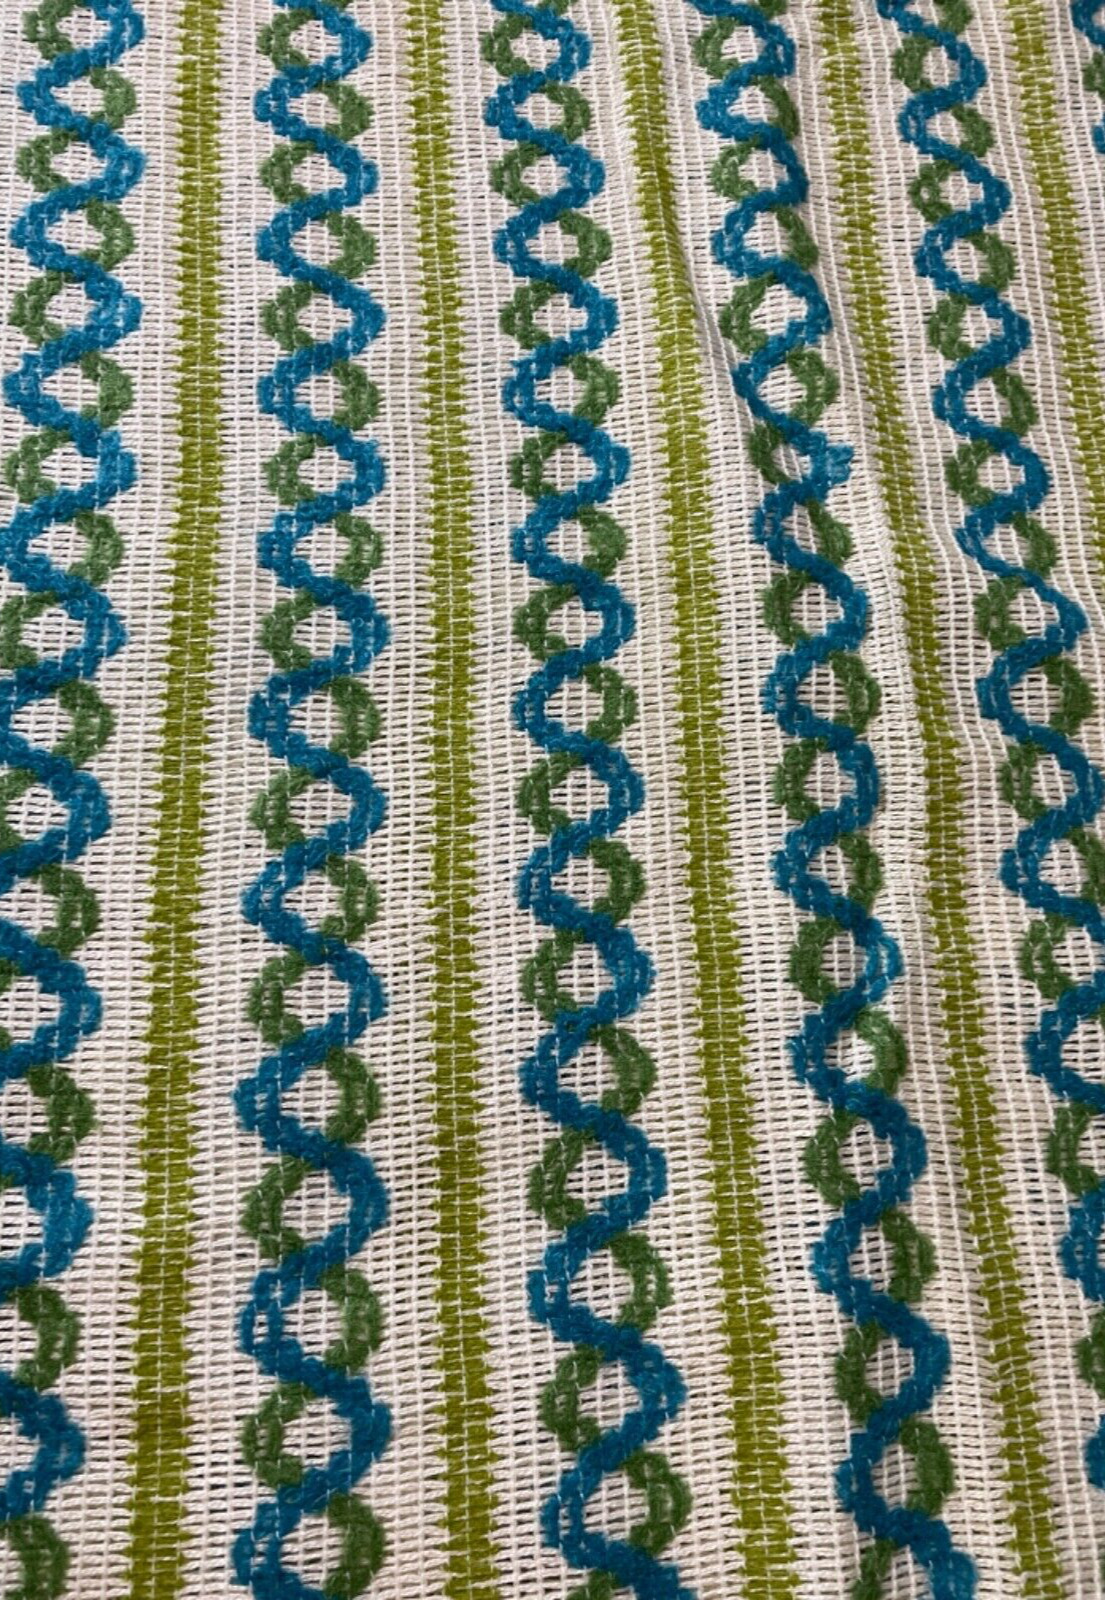 Vintage Curtains Fabric 2 Yds 9 Ins 48 W Teal Blue Green White Braided Stripes